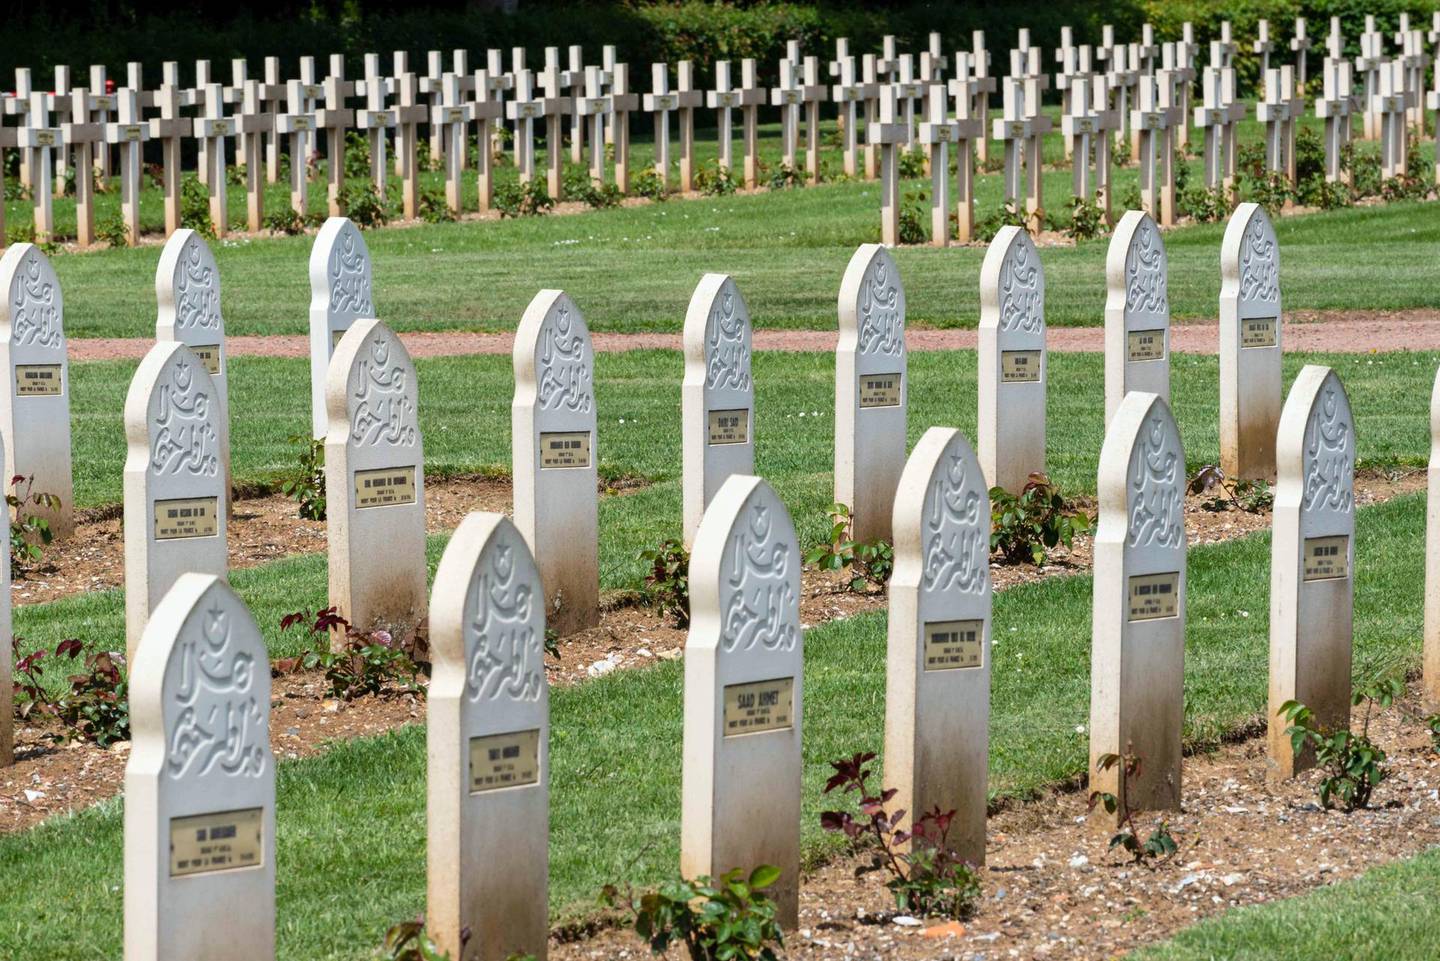 Muslim headstones from the First World War in Notre Dame de Lorette French national cemetery. In the background are Christian headstones. David Crossland / The National